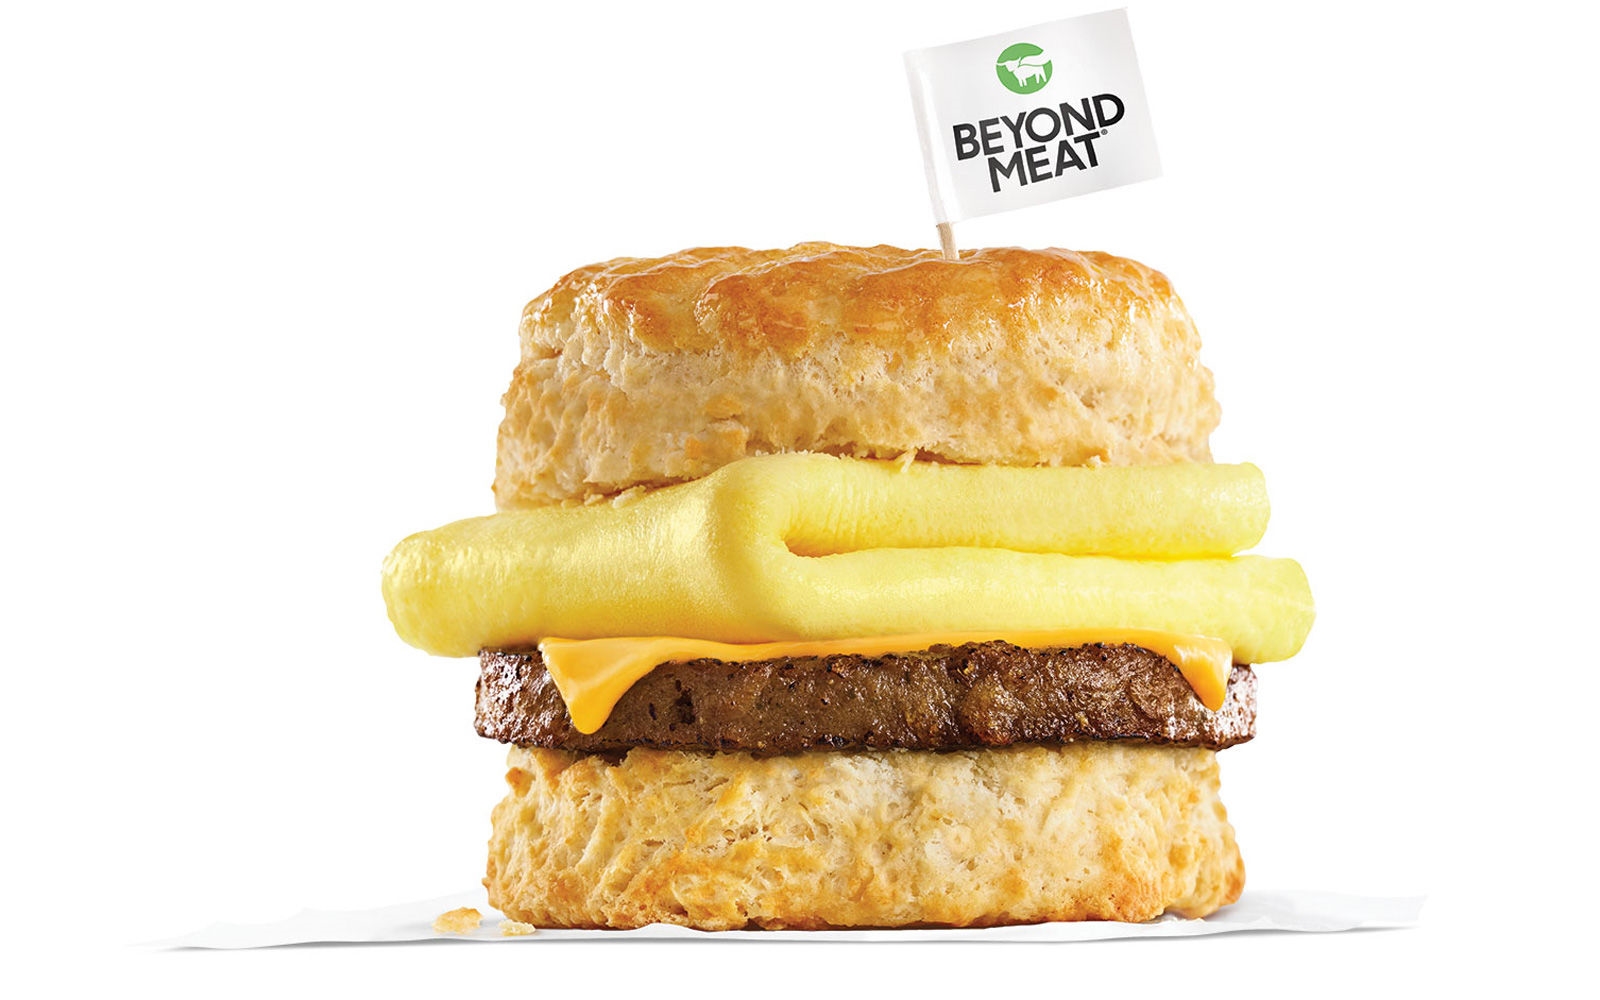 Beyond Meat breakfast options are coming to Carl’s Jr. and Hardee’s | DeviceDaily.com